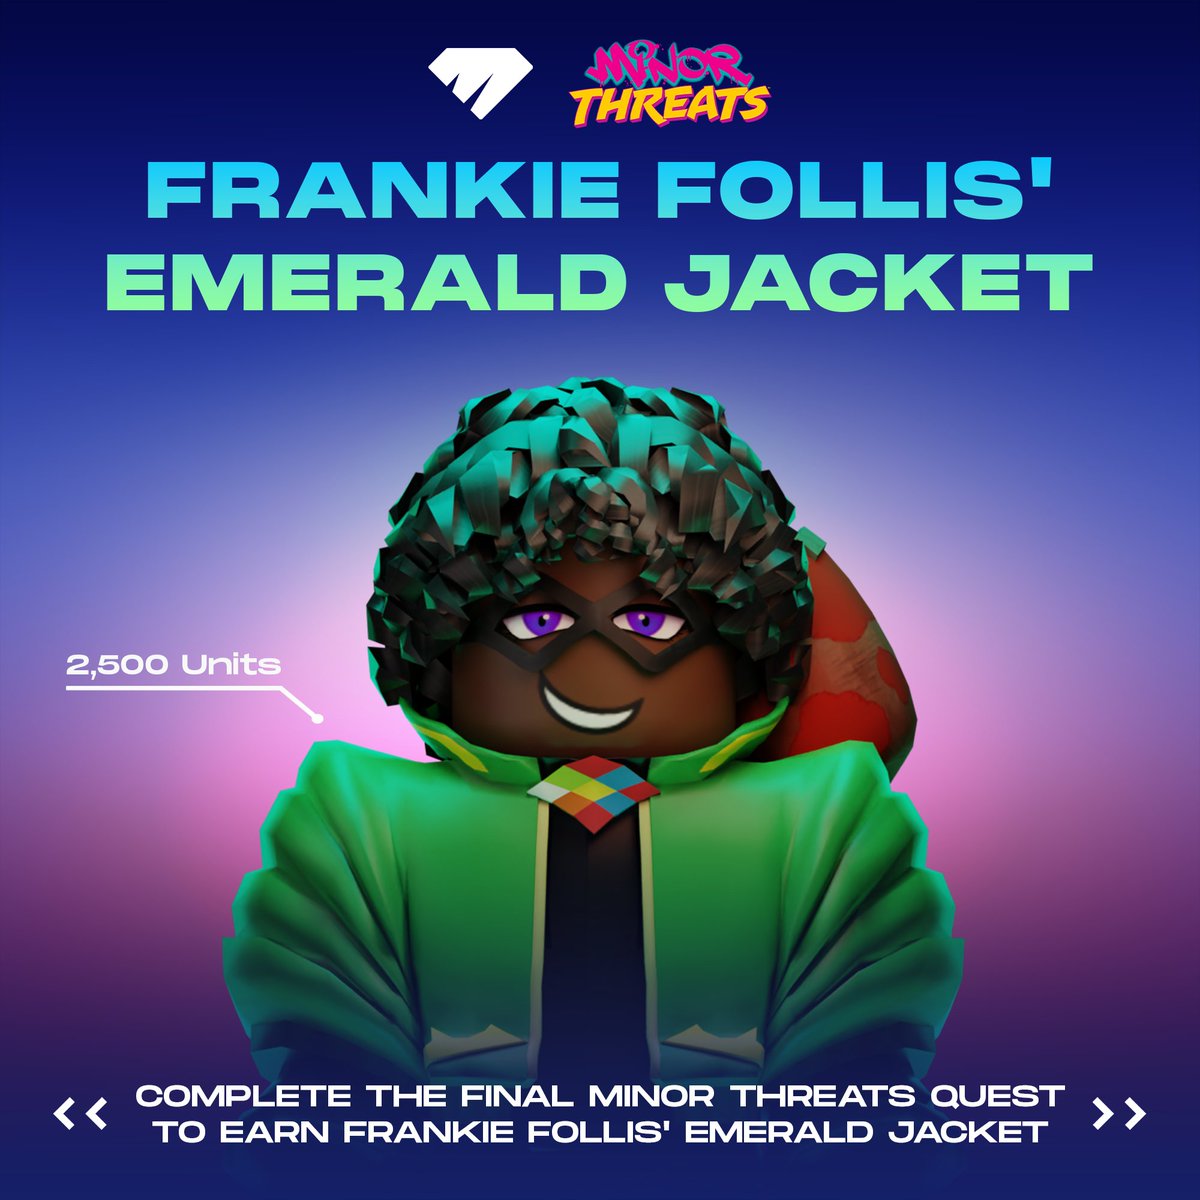 The final Minor Threats Loot Quest has just dropped, in collaboration with @darkhorsecomics @pattonoswalt and @blumjordan 💥 Receive the Frankie Follis Emerald Jacket UGC, the final part of the collection, and a FREE digital copy of The Alternates #1 upon quest completion!